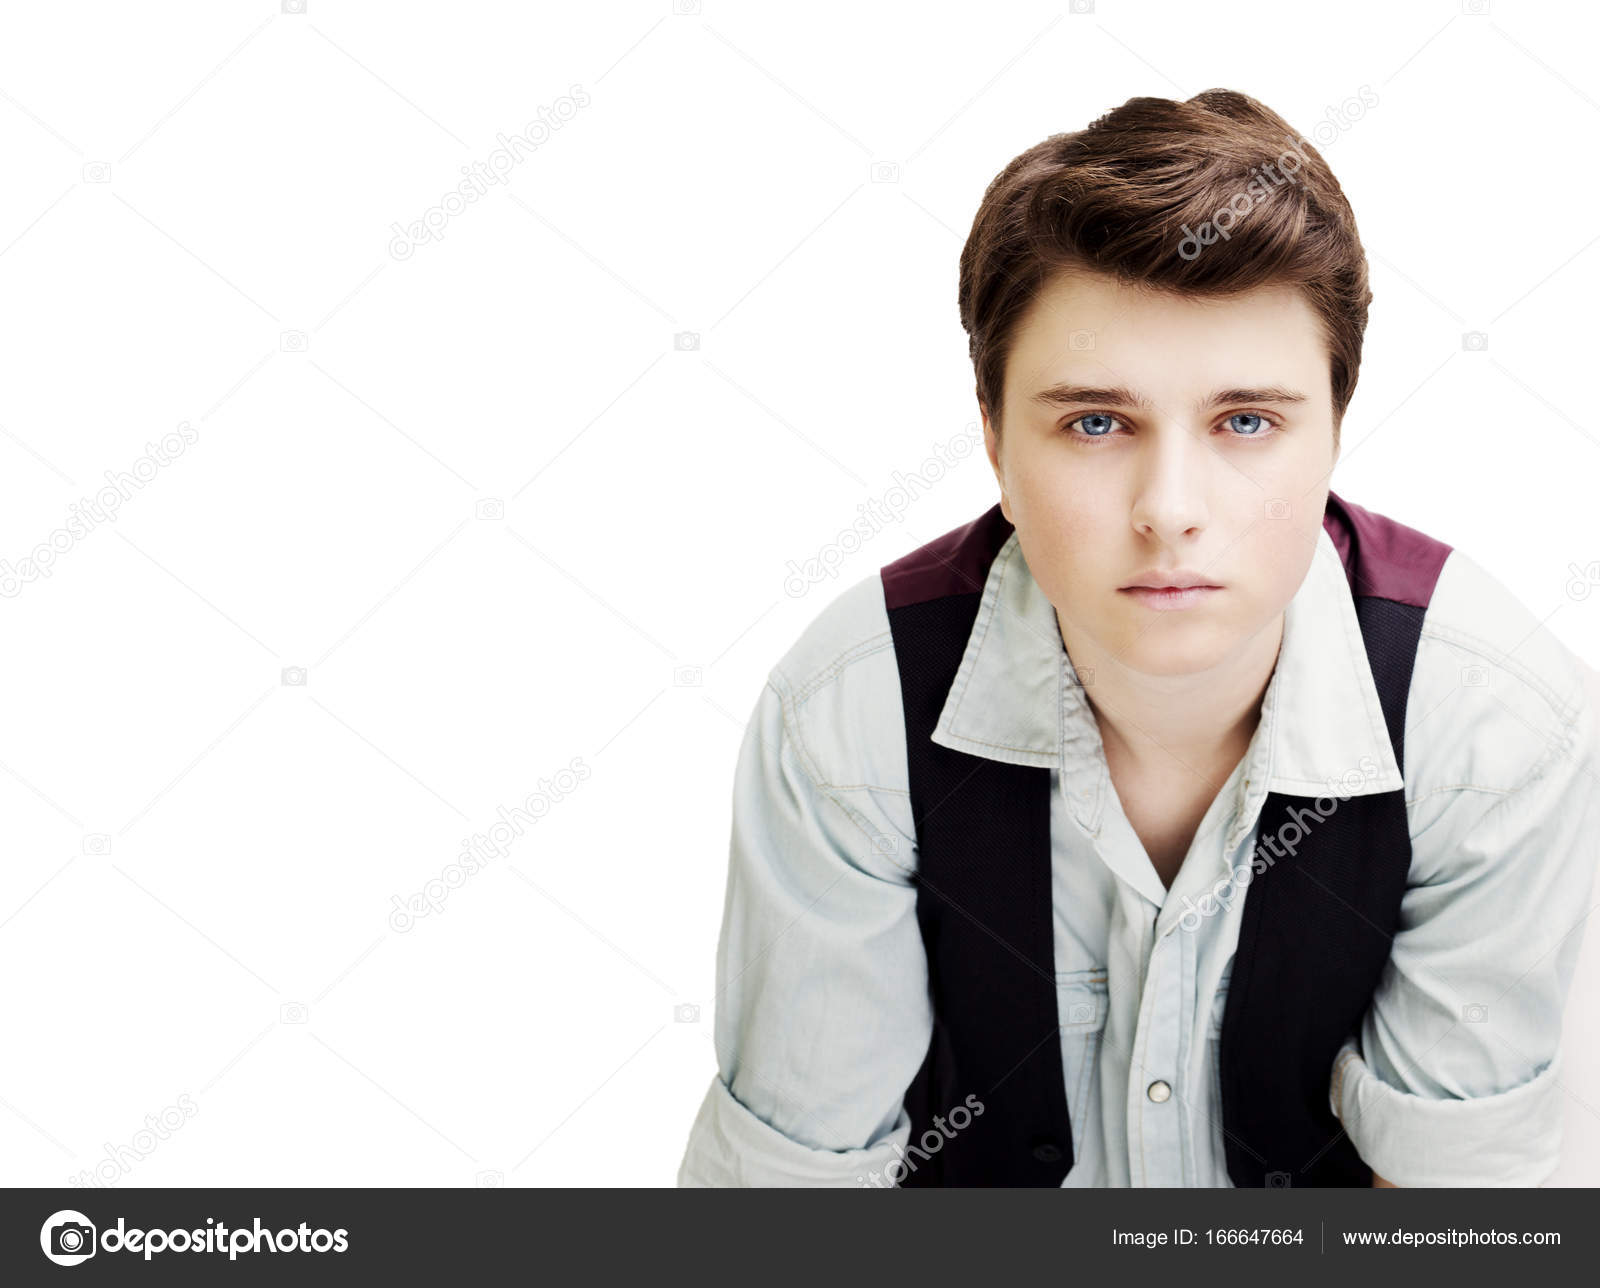 Stylish handsome young man posing. — Stock Photo © Viculia #166647664